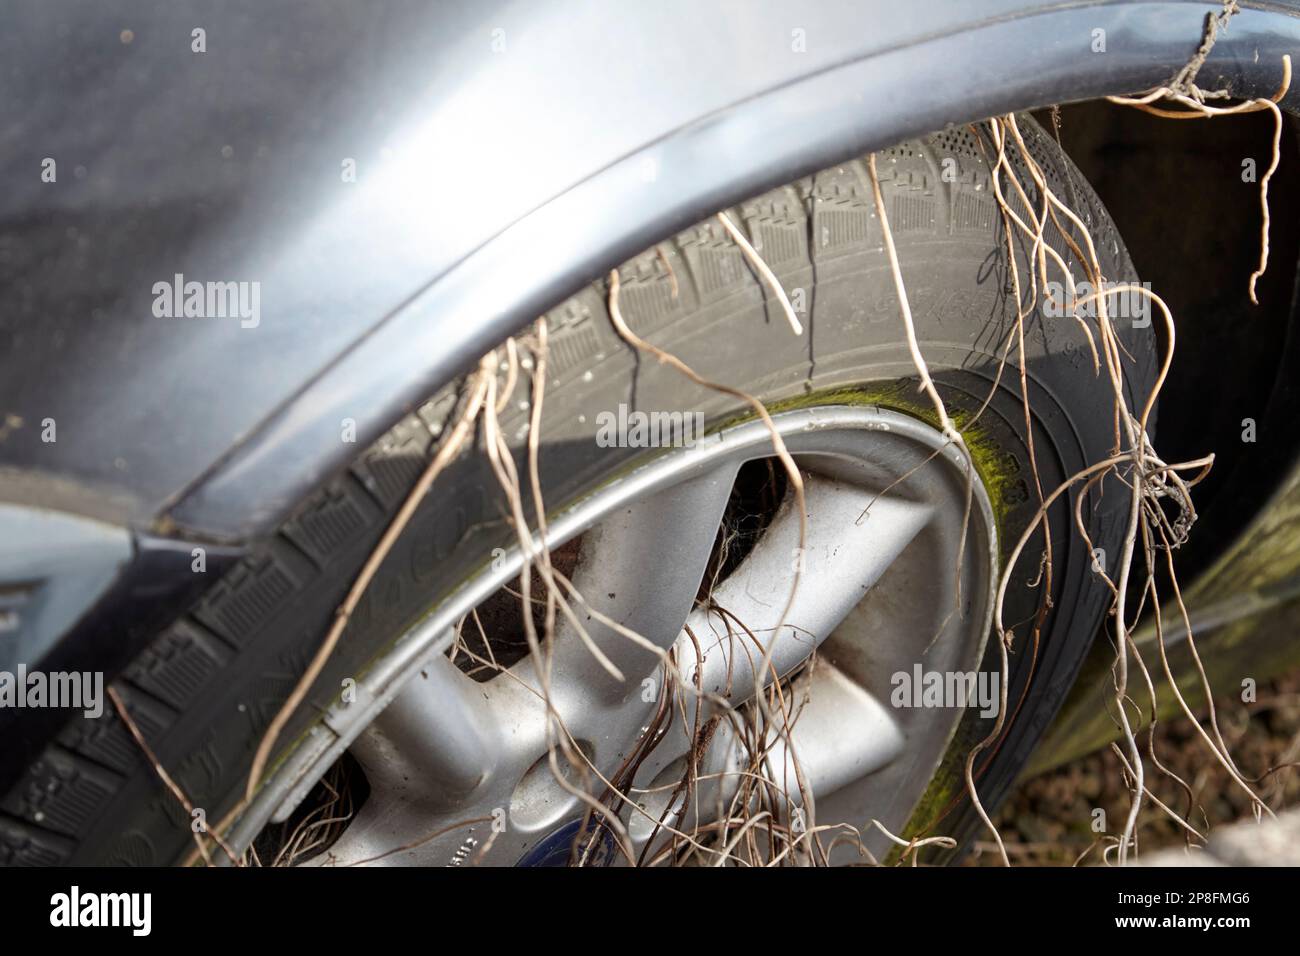 old weed vegetation growth on wheel and tyre of old abandoned barn find car Belfast Northern Ireland UK Stock Photo